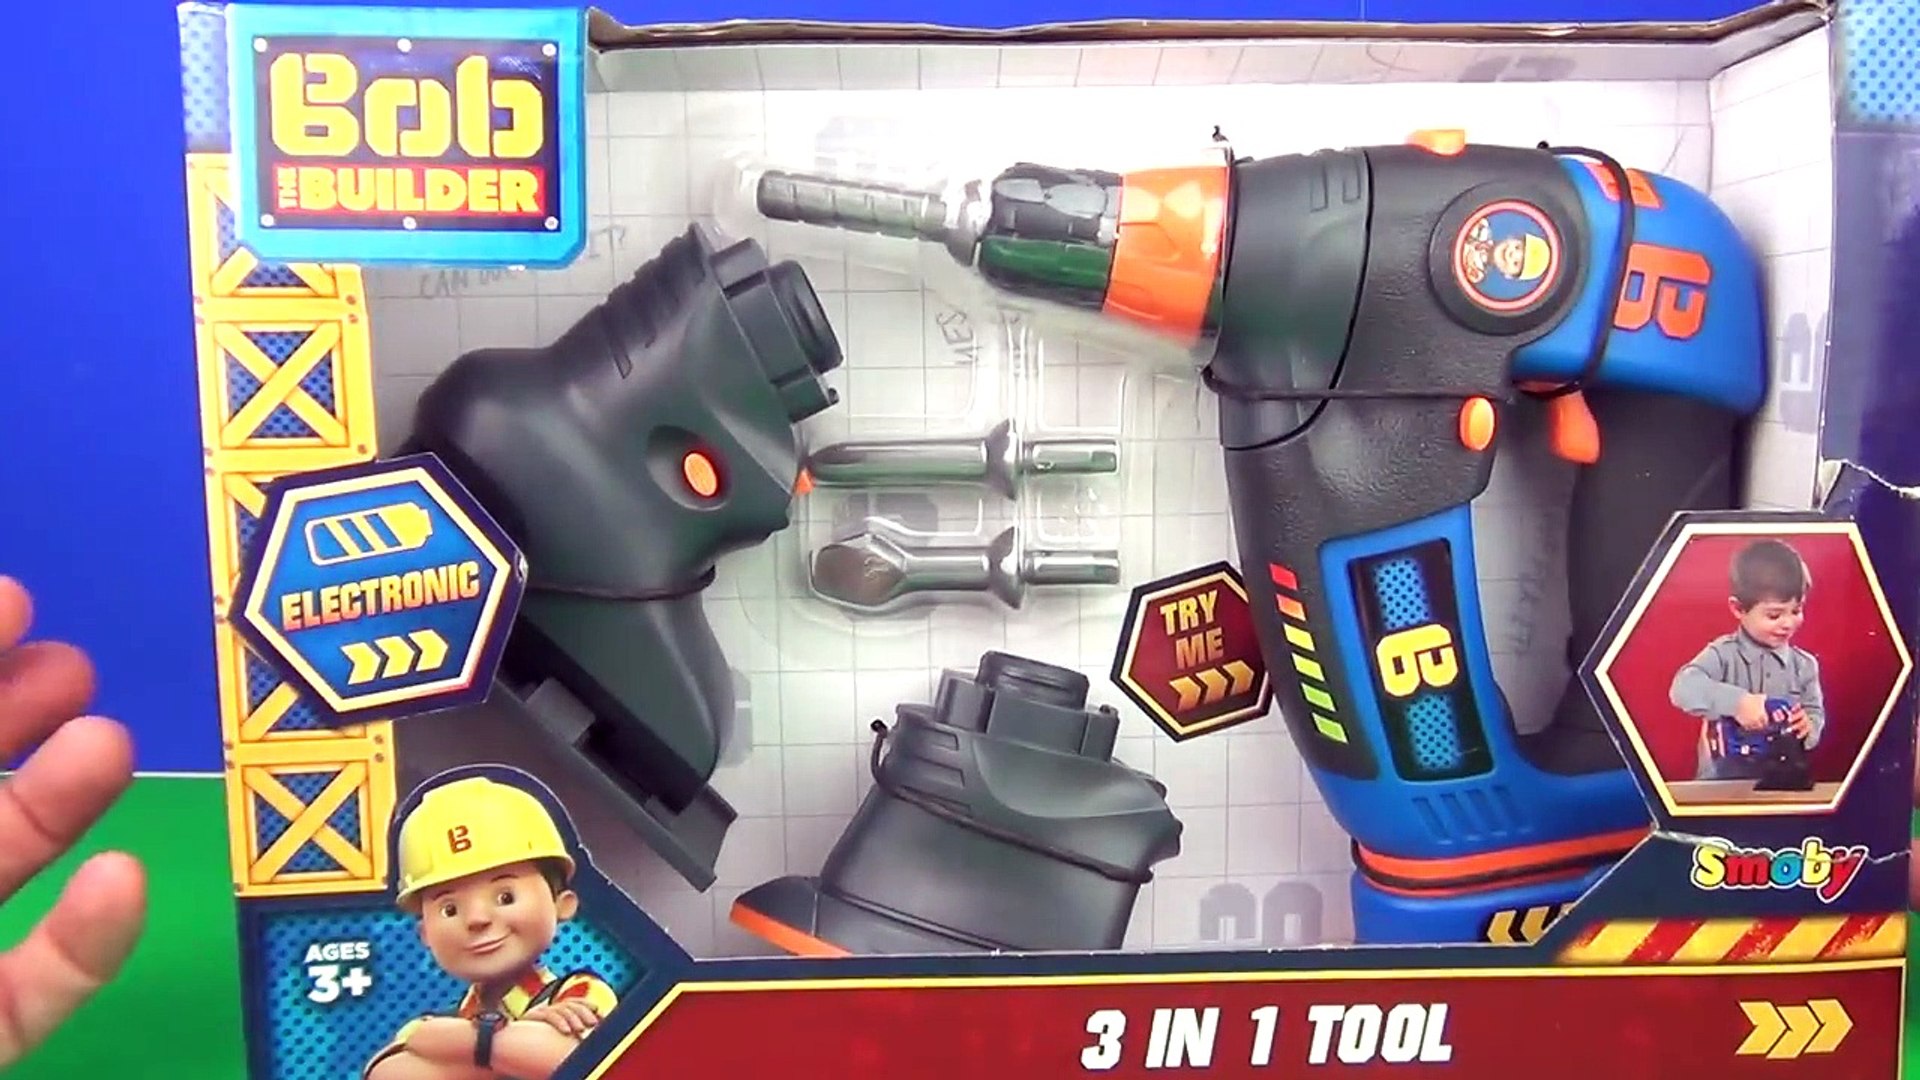 Bob The Builder 3 in 1 Tool Kids Toy Review Smoby - video Dailymotion